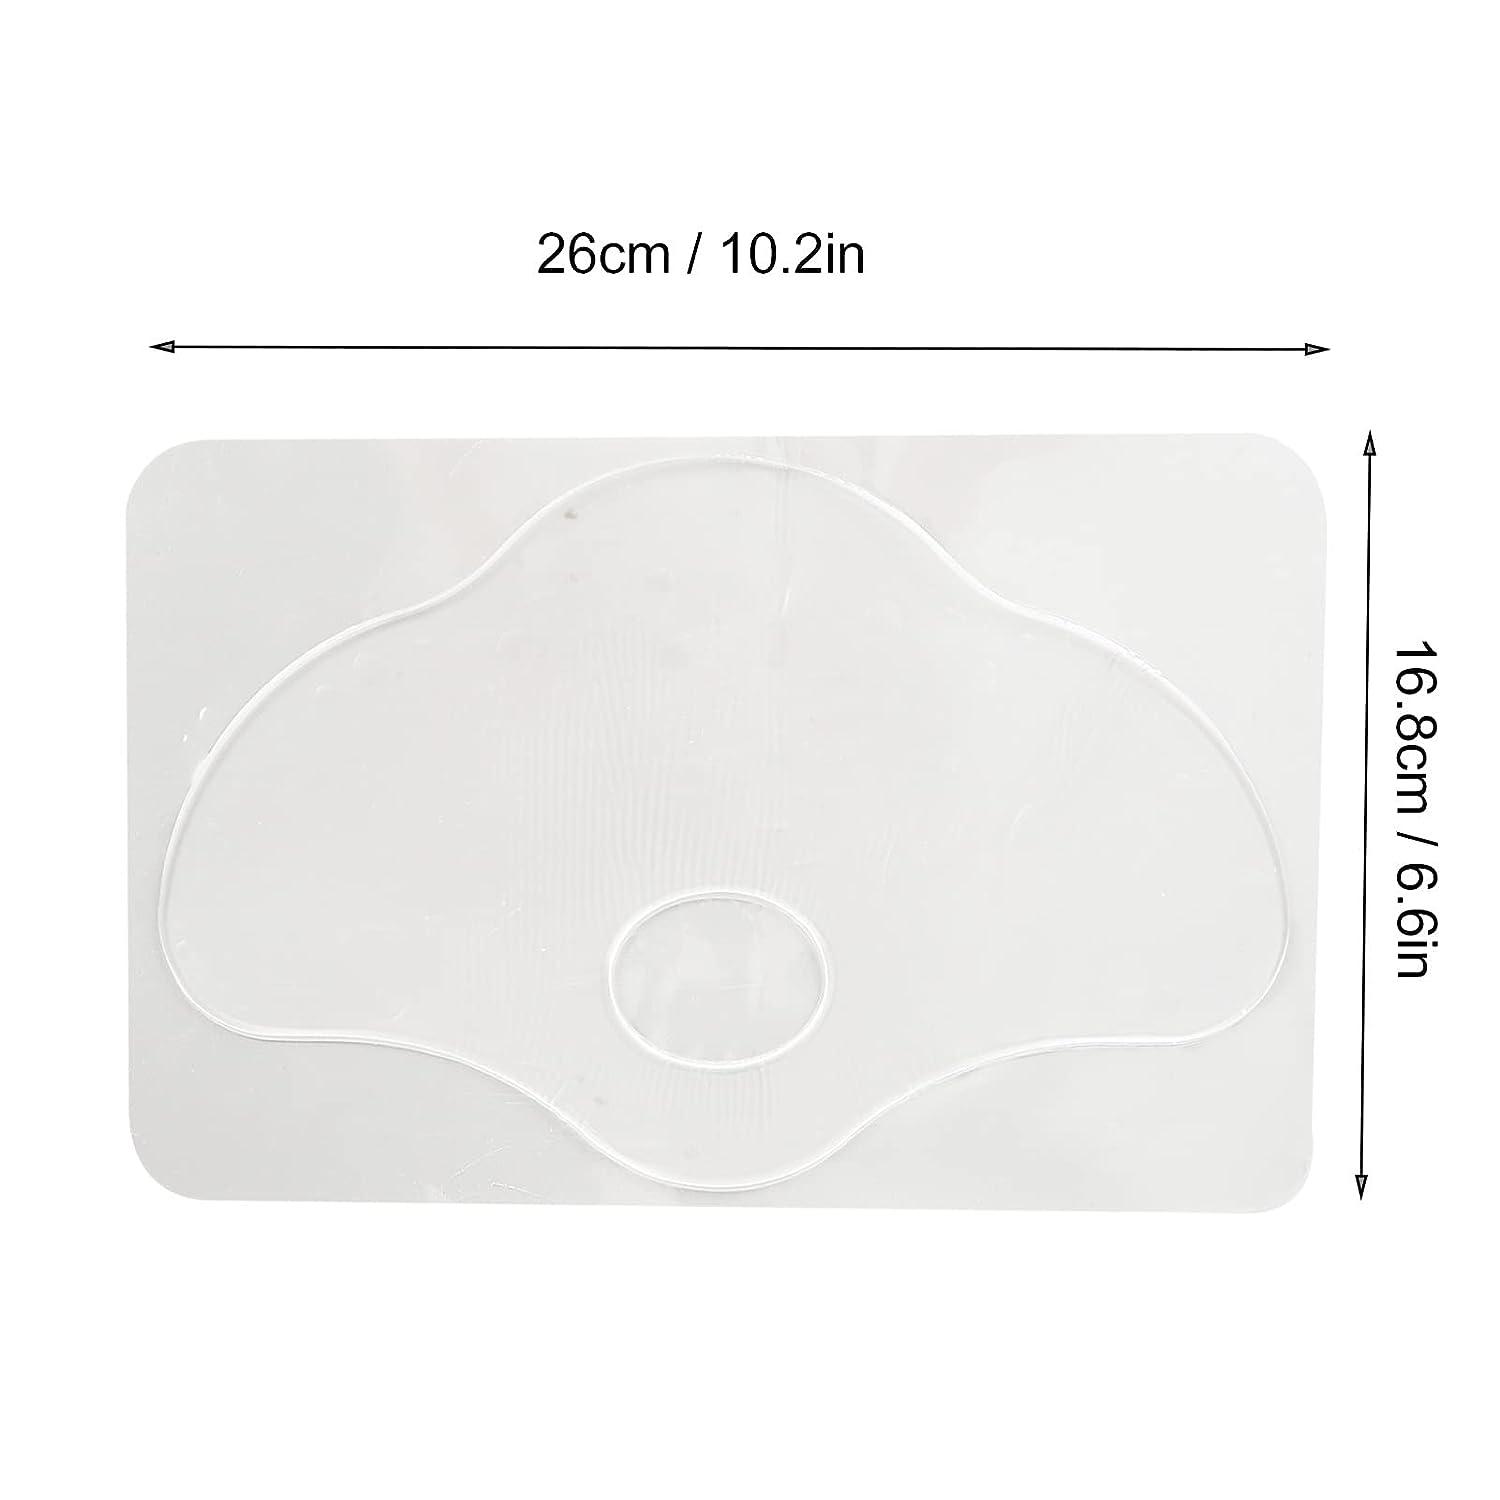 ZJchao Belly Silicone Pad, Anti Wrinkle Scar Removal Sheet